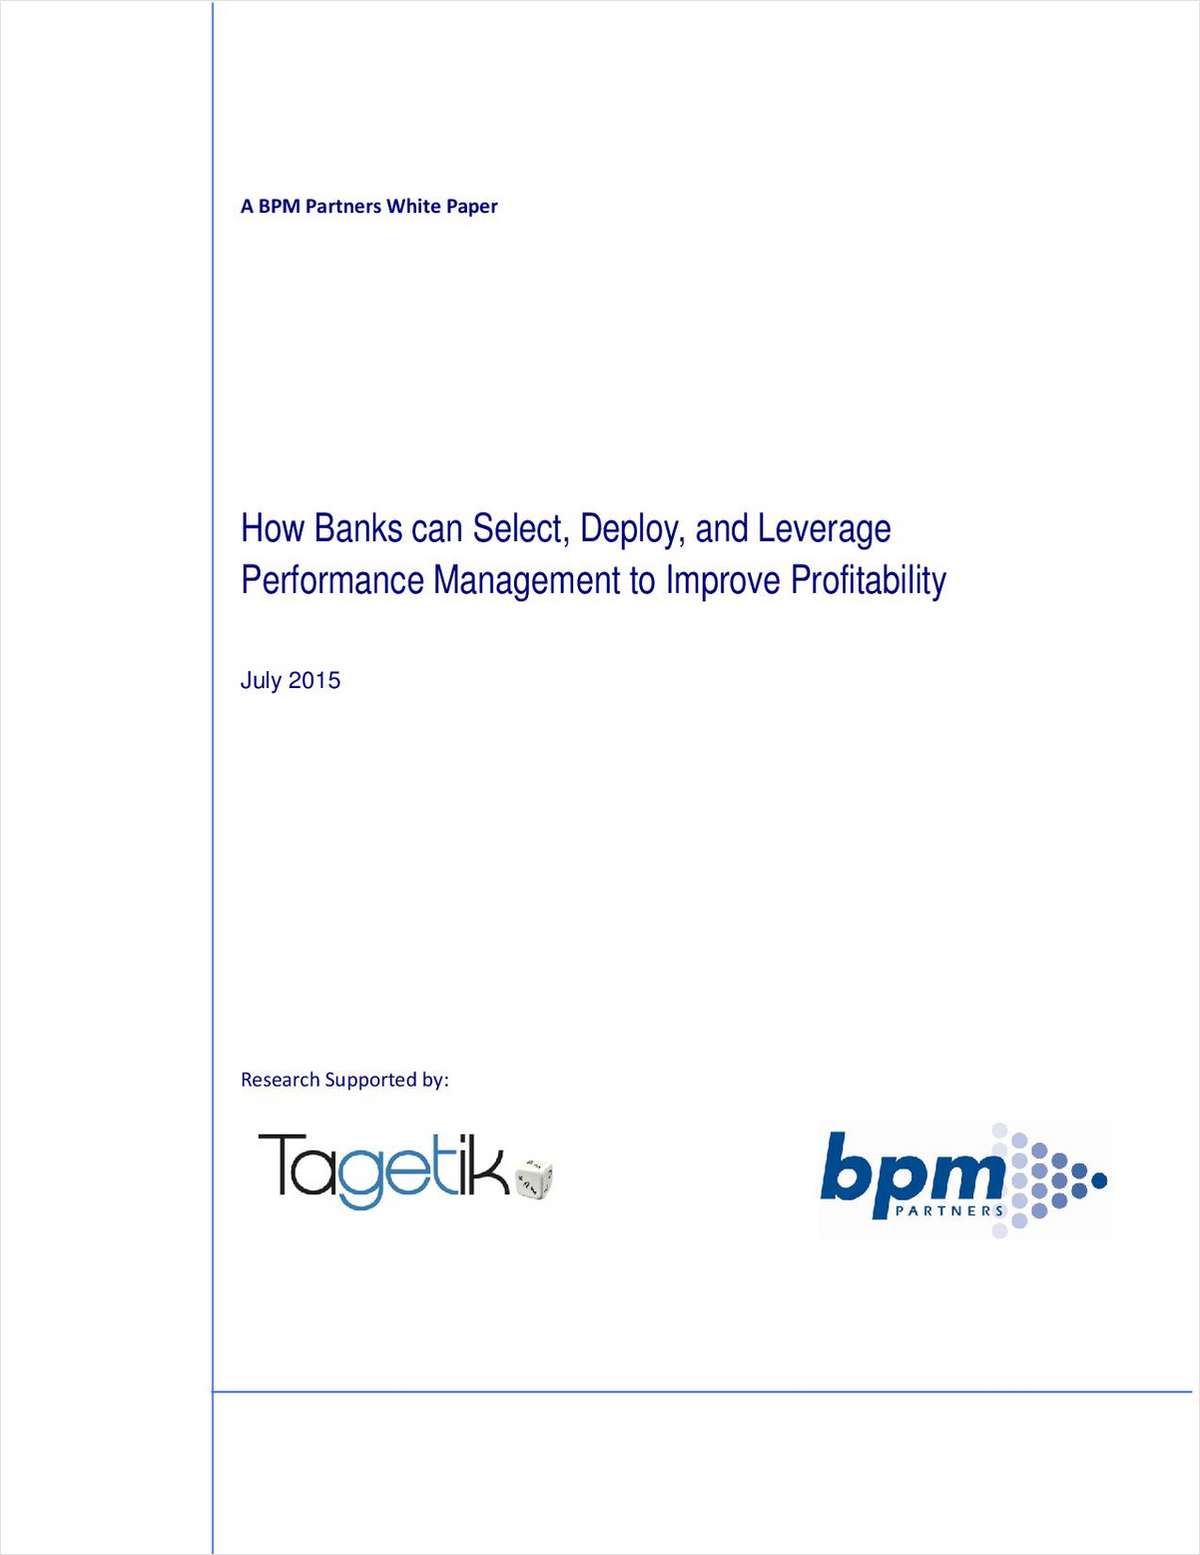 How Banks Can Select, Deploy and Leverage Performance Management to Improve Profitability